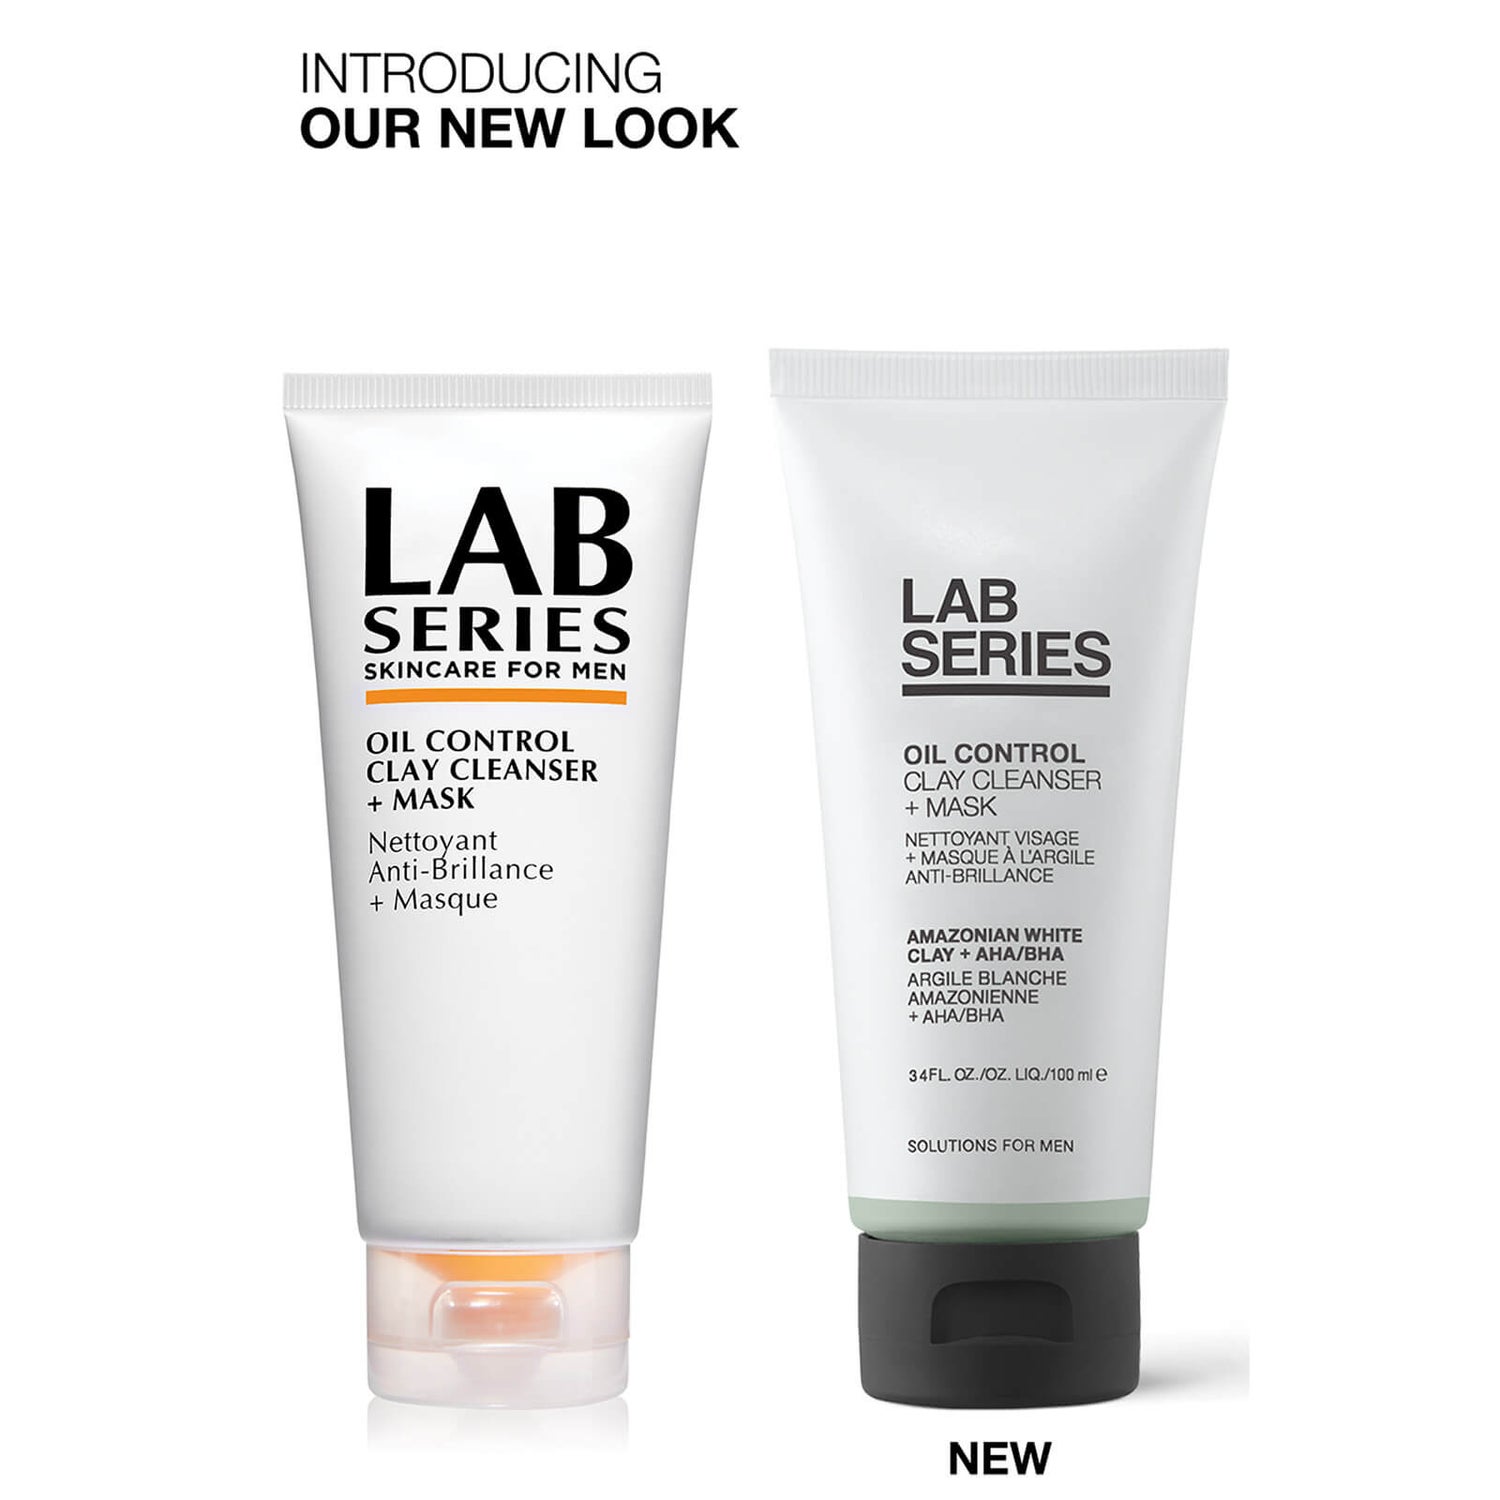 Lab Series Skincare for Men Oil Control Clay Cleanser and Mask 100 ml